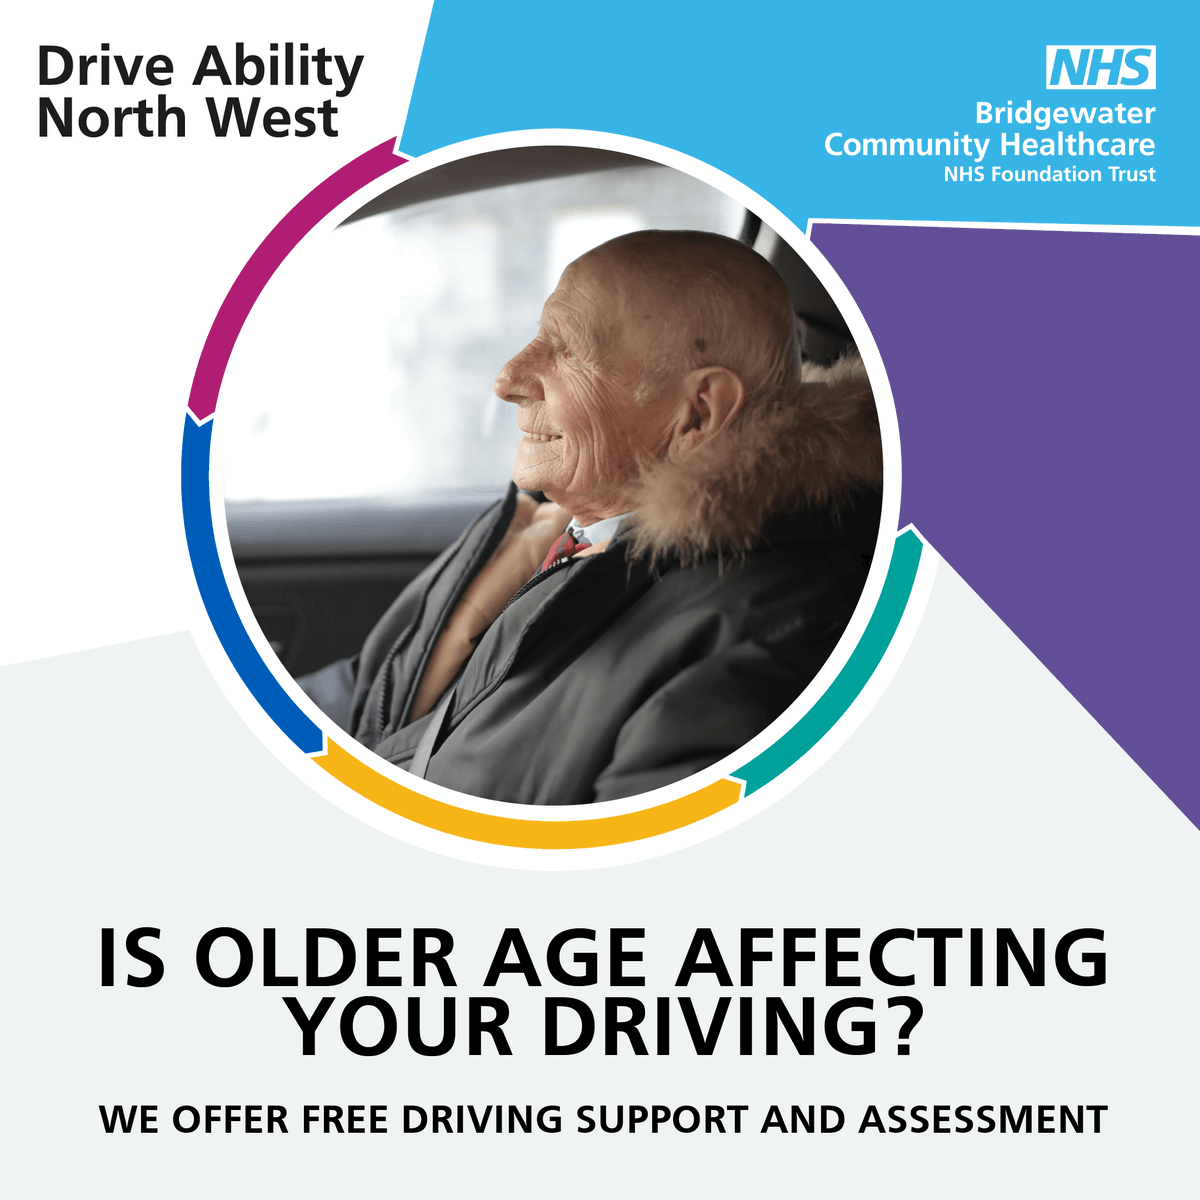 Feel older age may be affecting your driving? 🚗 We can help you drive safely, maintaining your independence as a driver or passenger 💙 For free driving support and assessment: 📲 01942 483 713 💻bridgewater.nhs.uk/drive #OlderDrivers @DrivingMob